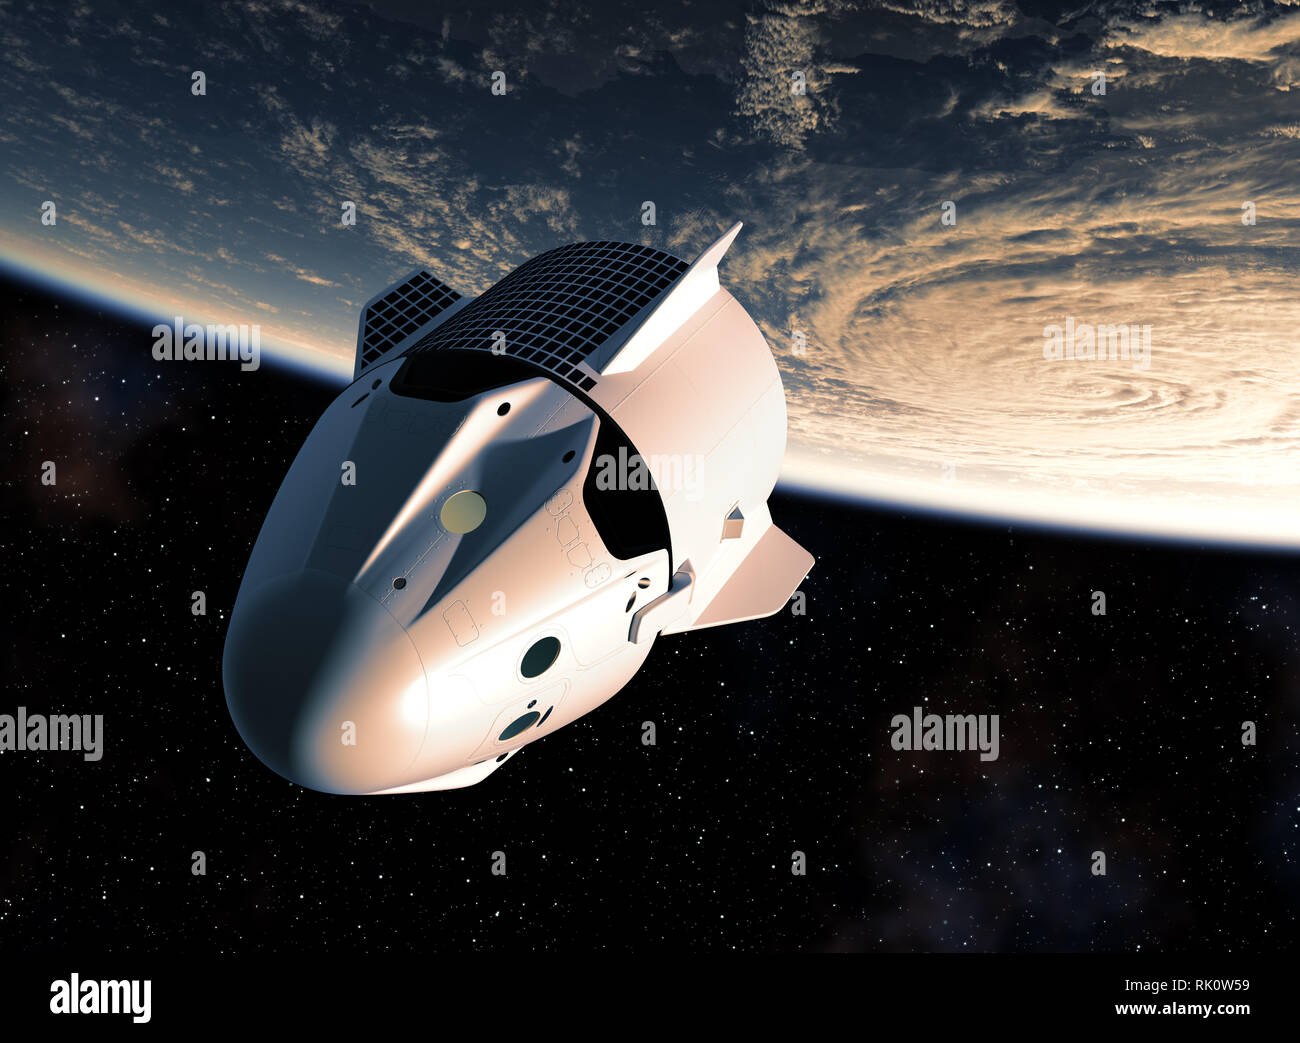 Commercial Spacecraft Orbiting Planet Earth. 3D Illustration. Stock Photo